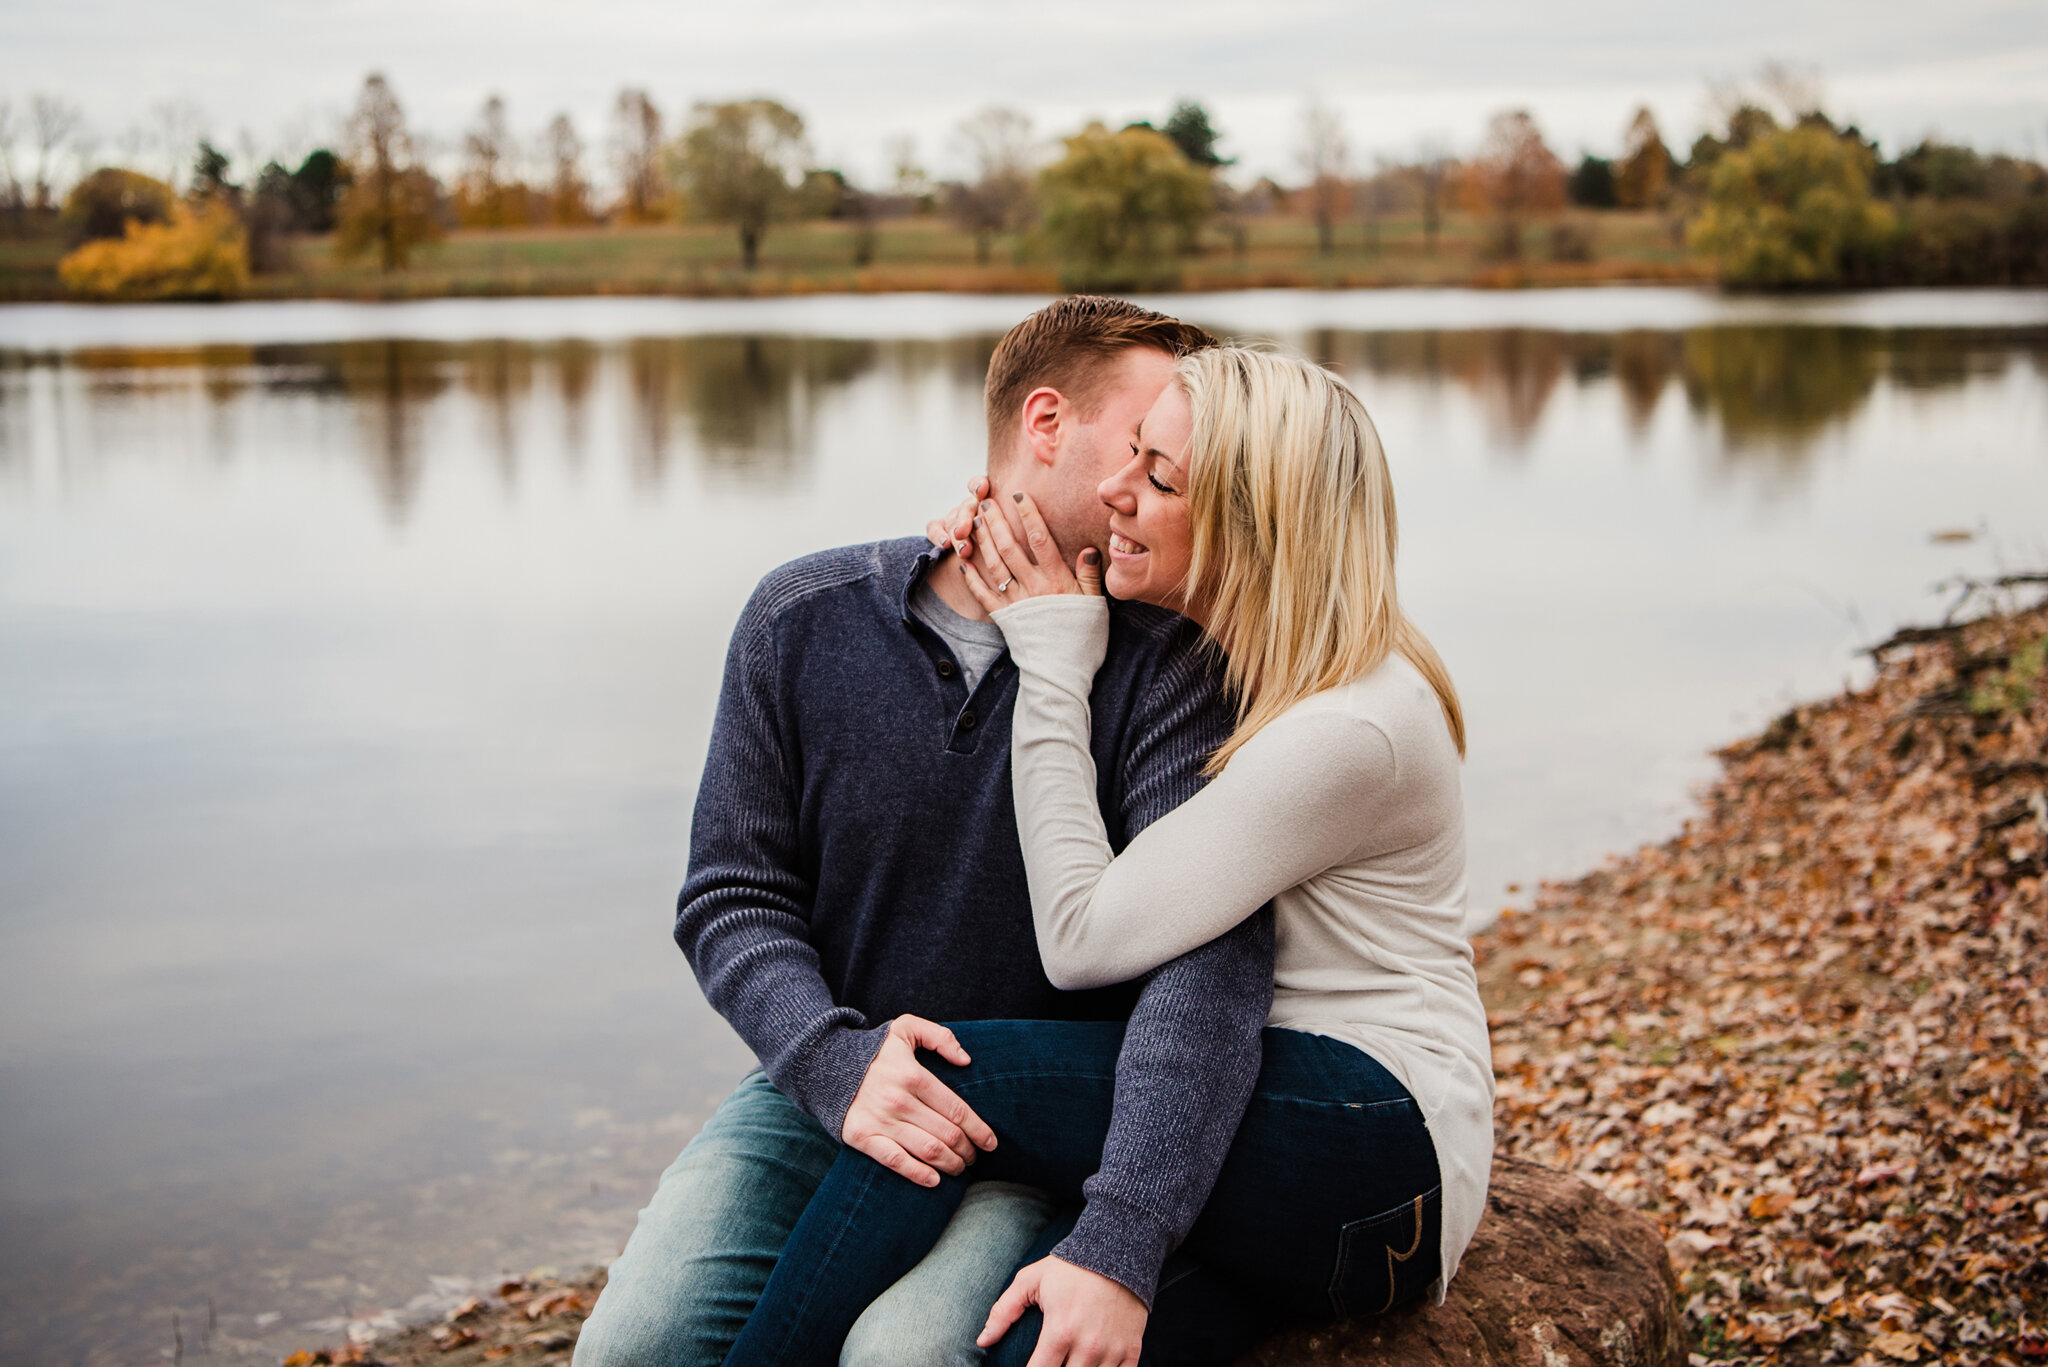 North_Ponds_Park_Rochester_Engagement_Session_JILL_STUDIO_Rochester_NY_Photographer_3398.jpg